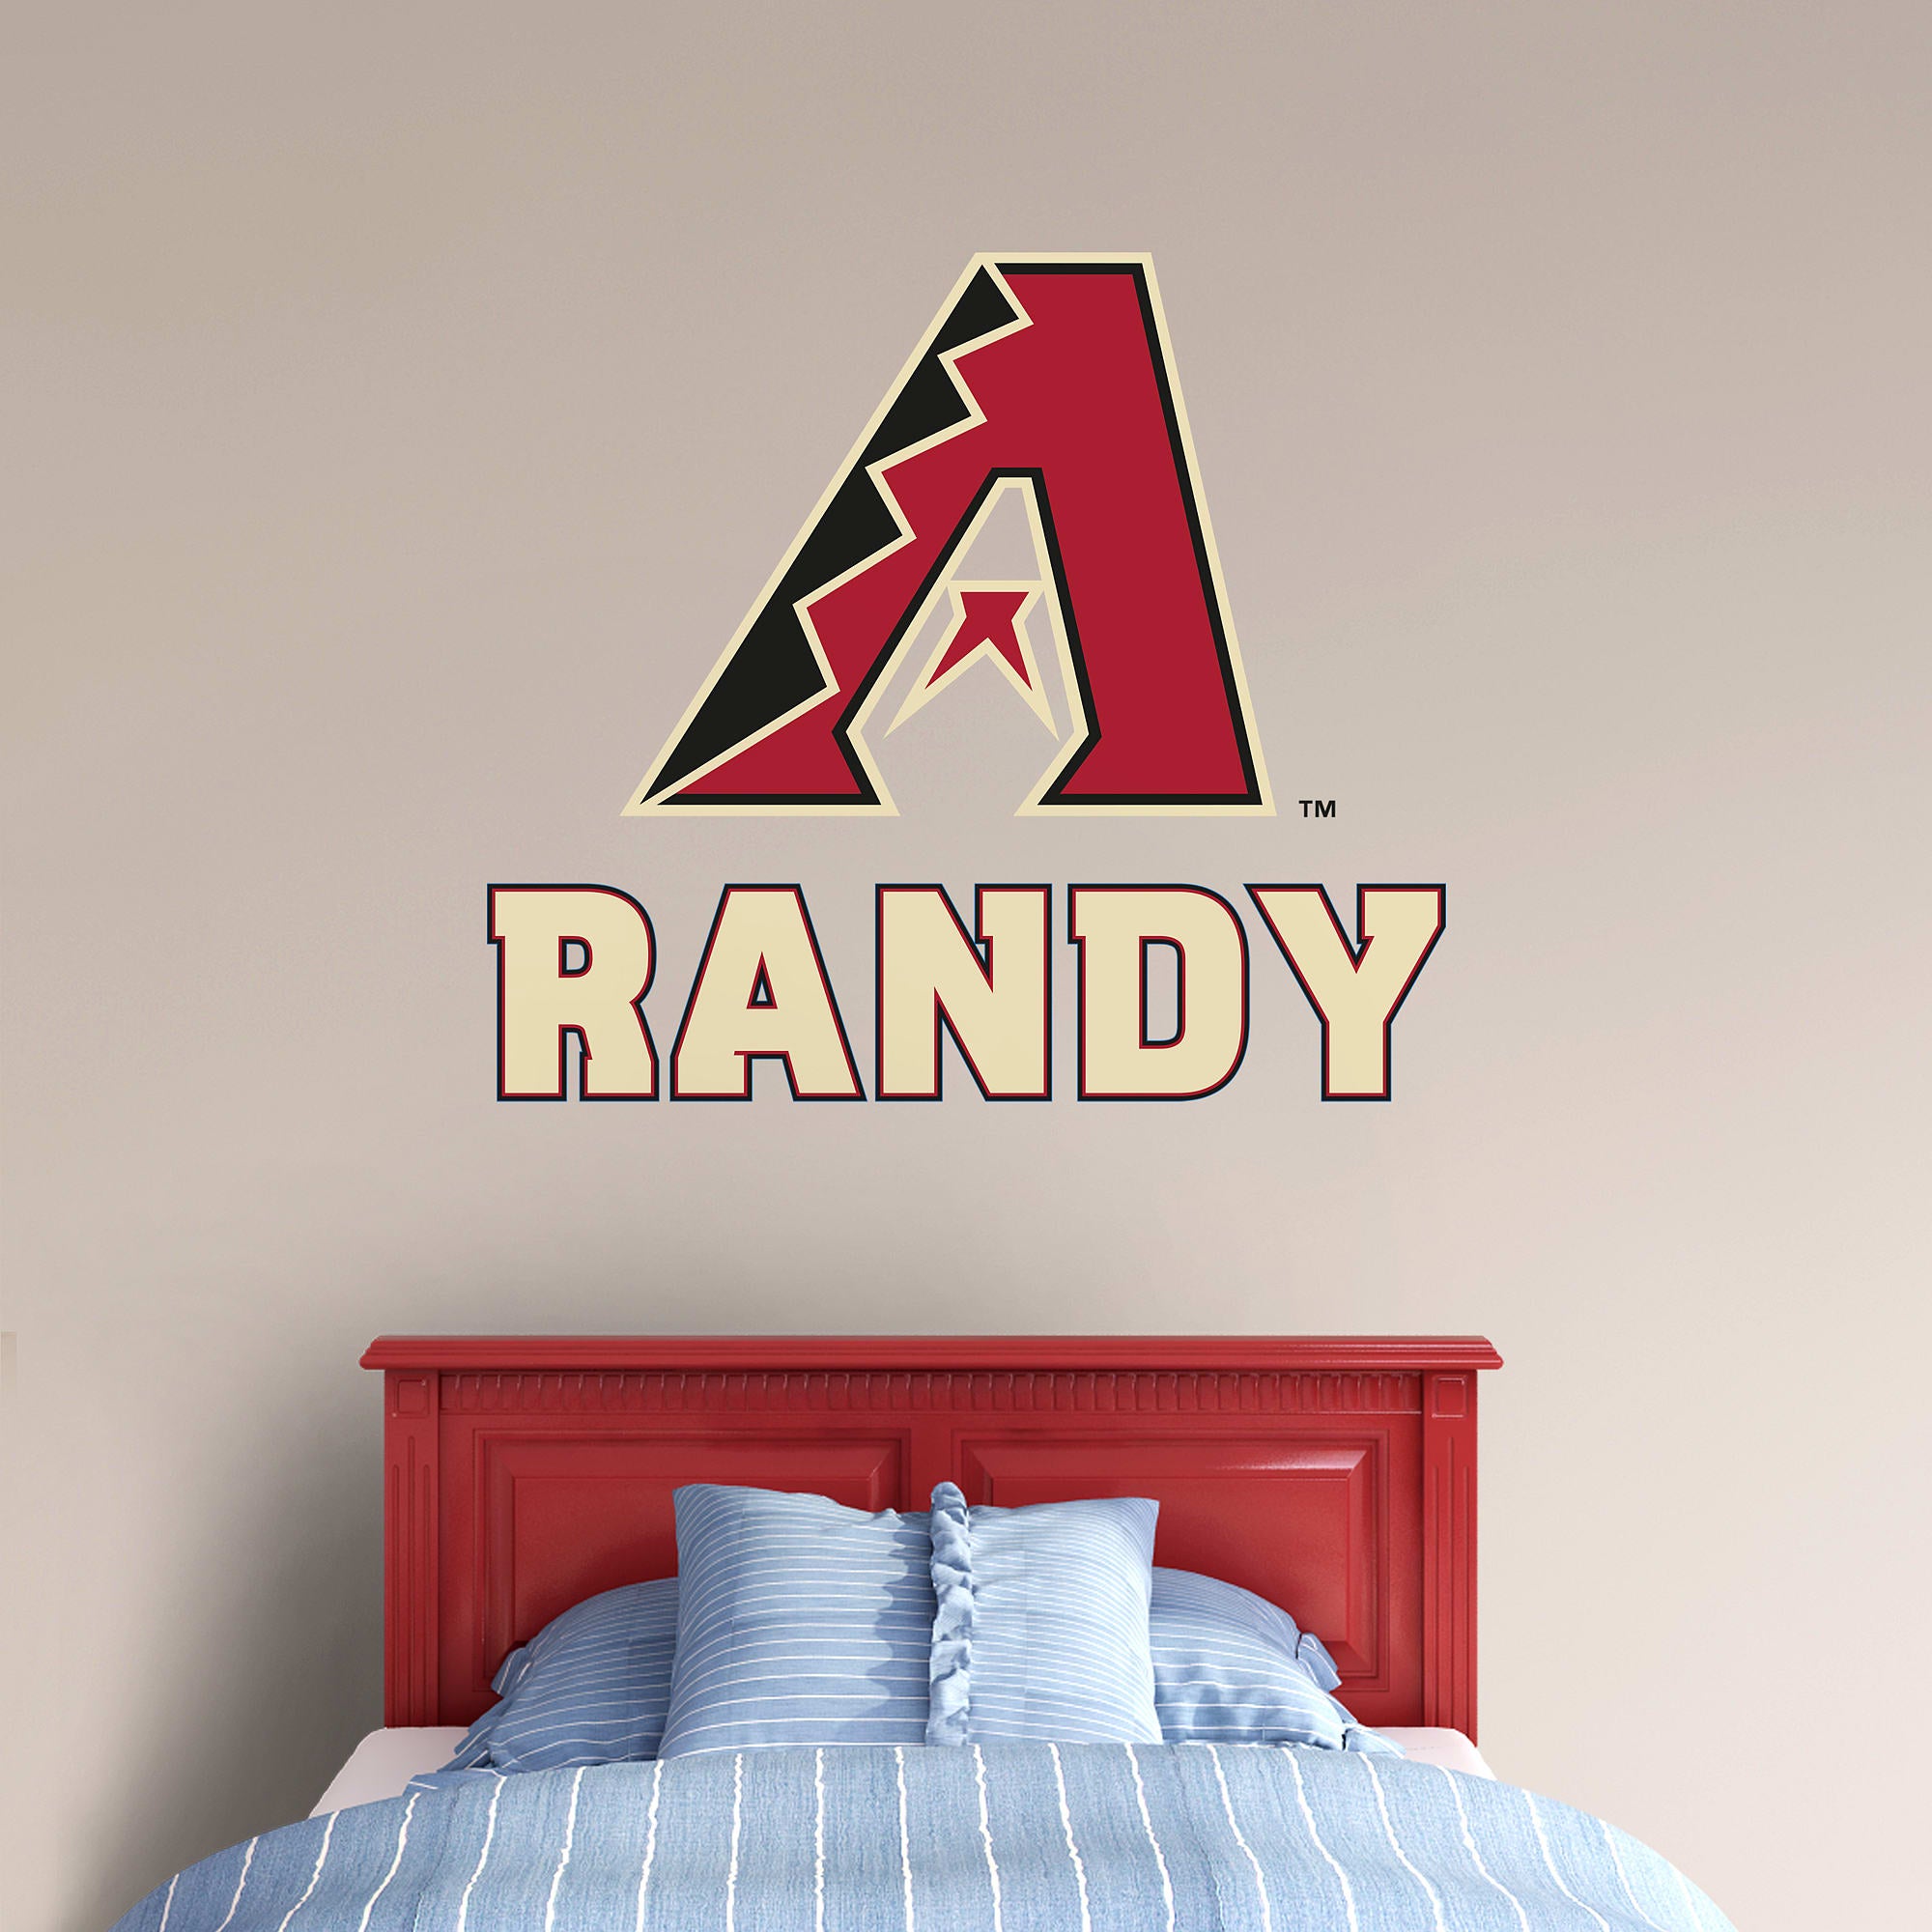 Arizona Diamondbacks: Stacked Personalized Name - Officially Licensed MLB Transfer Decal in Sand (52"W x 39.5"H) by Fathead | Vi